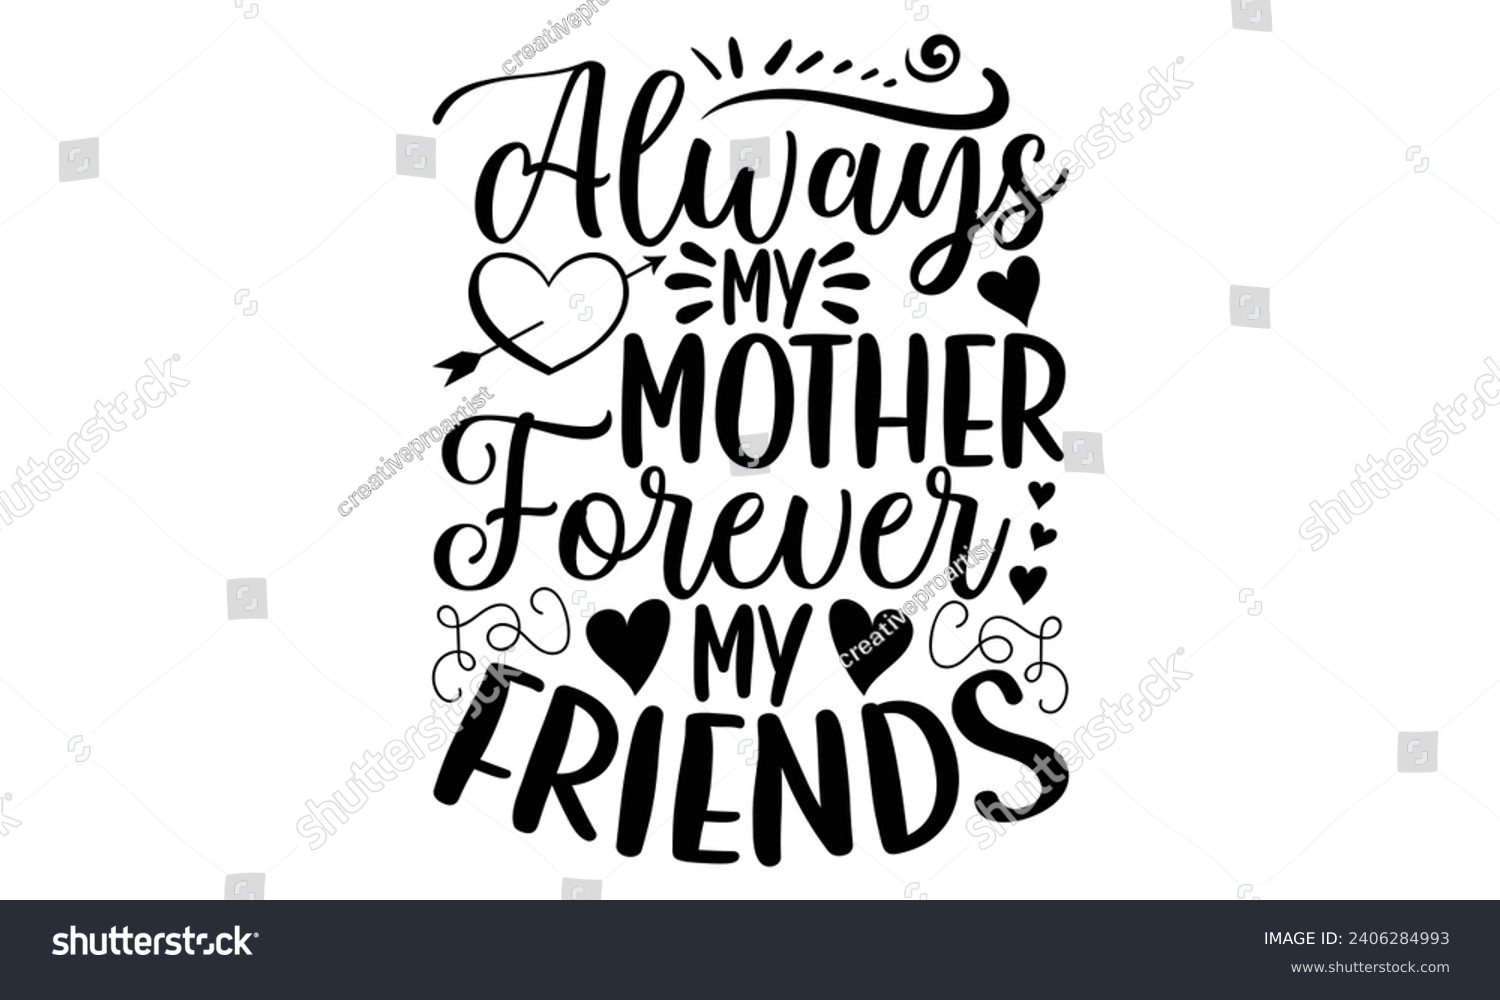 SVG of Always My Mother Forever My Friends- Best friends t- shirt design, Hand drawn lettering phrase, Illustration for prints on bags, posters, cards eps, Files for Cutting, Isolated on white background. svg